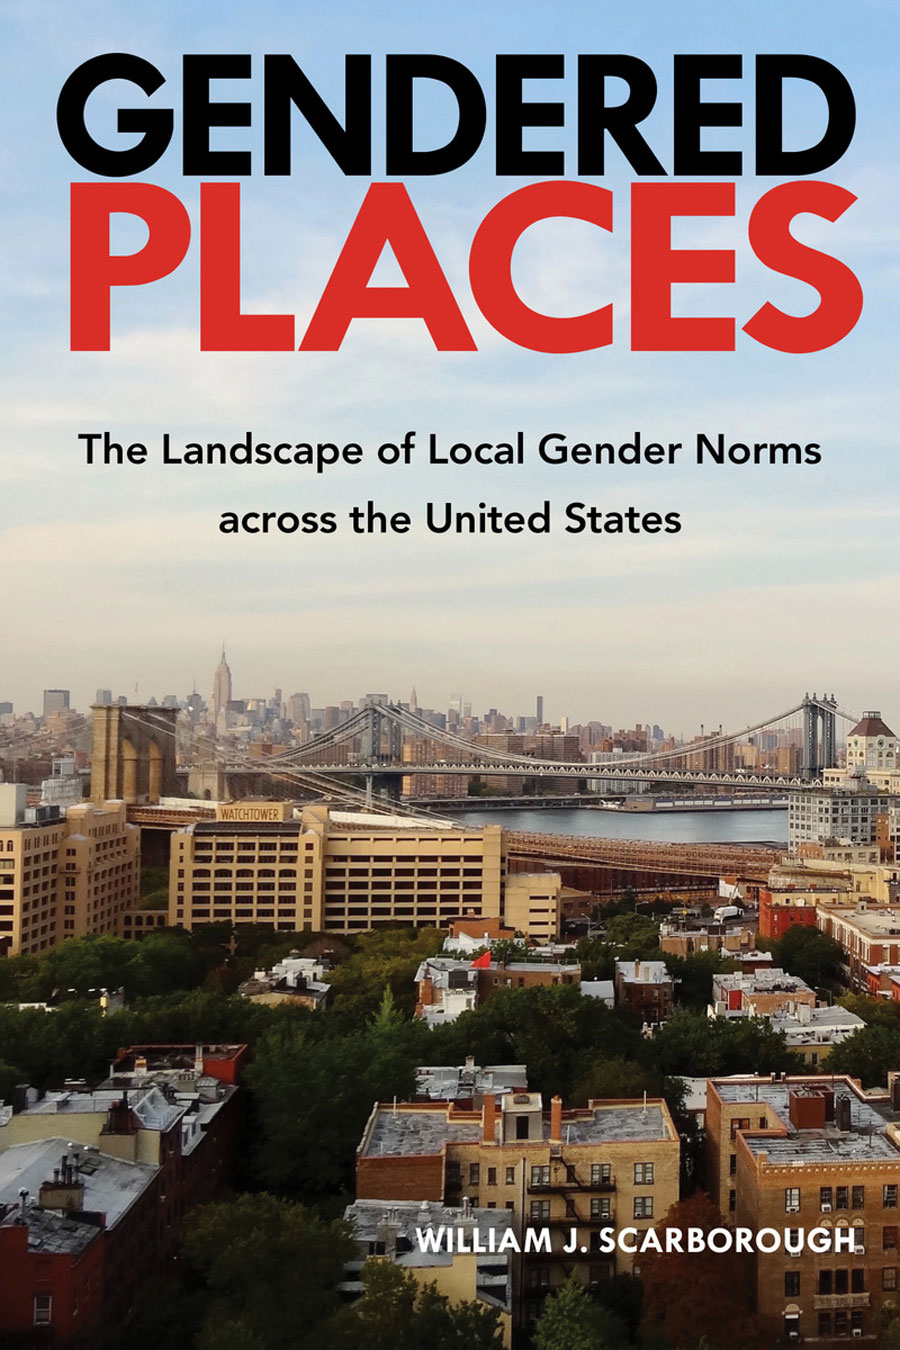 Gendered Places: The Landscape of Local Gender Norms across the United States